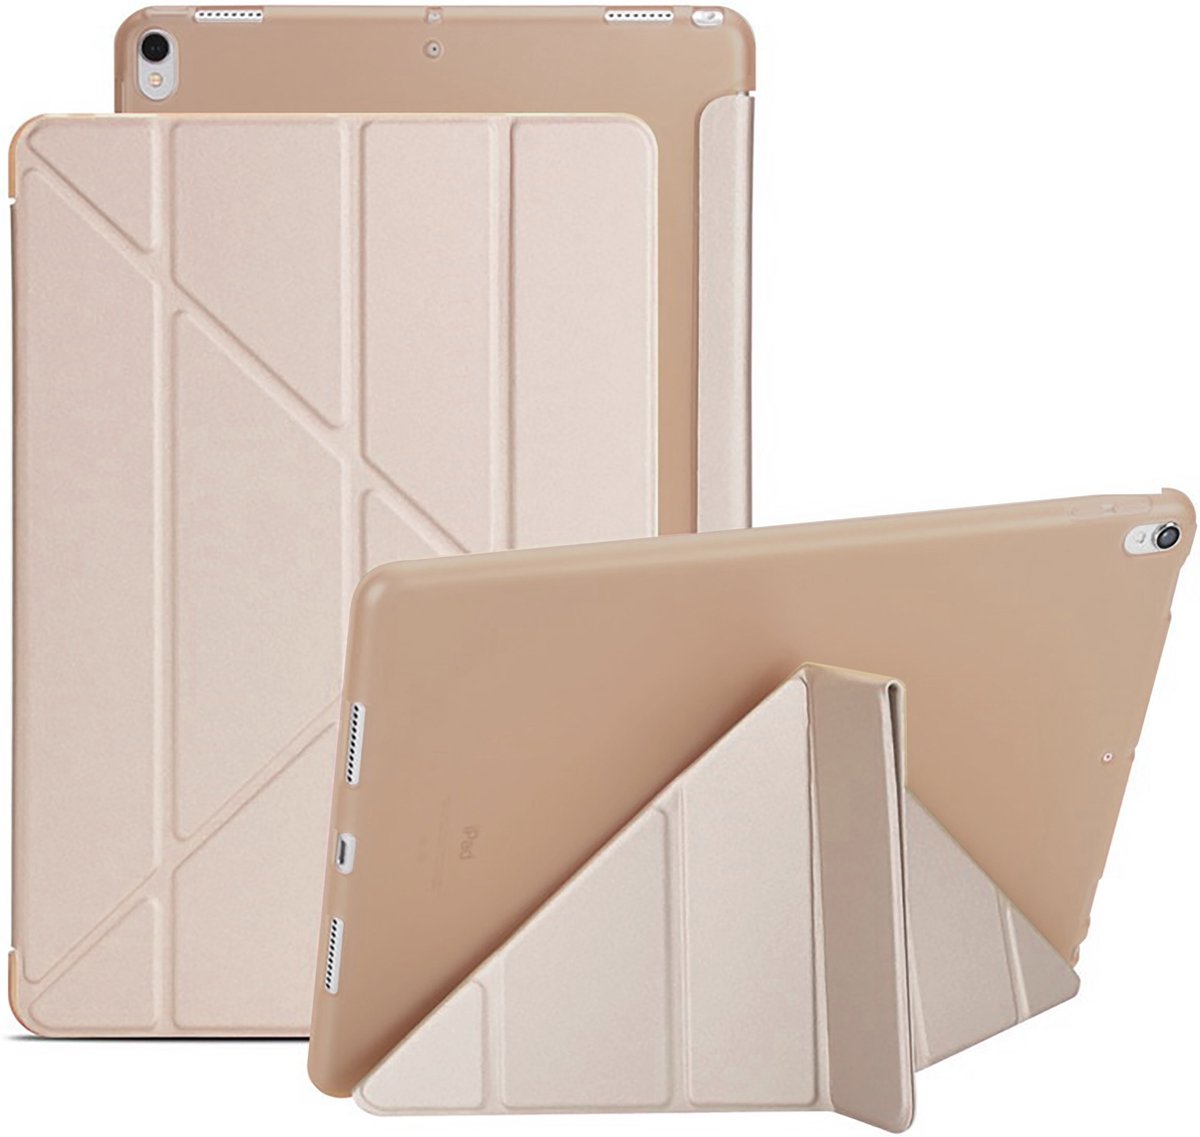 Tablet Hoes geschikt voor iPad Hoes 2016 - Pro - 9.7 inch - Smart Cover - A1673 - A1674 - A1675 - Goud